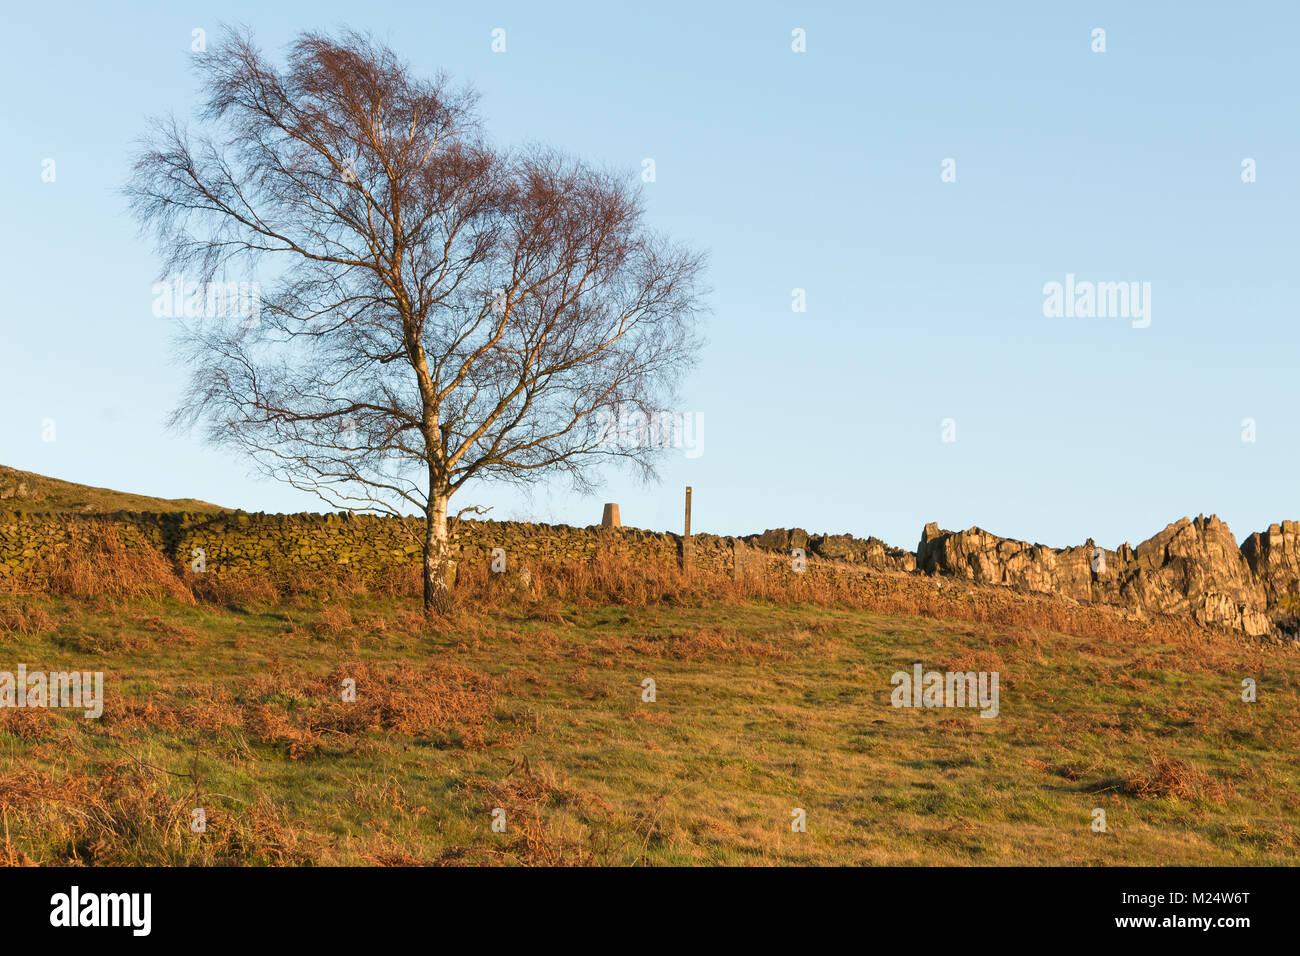 An image shot in the golden hour at Beacon Hill, Leicestershire, England, UK Stock Photo